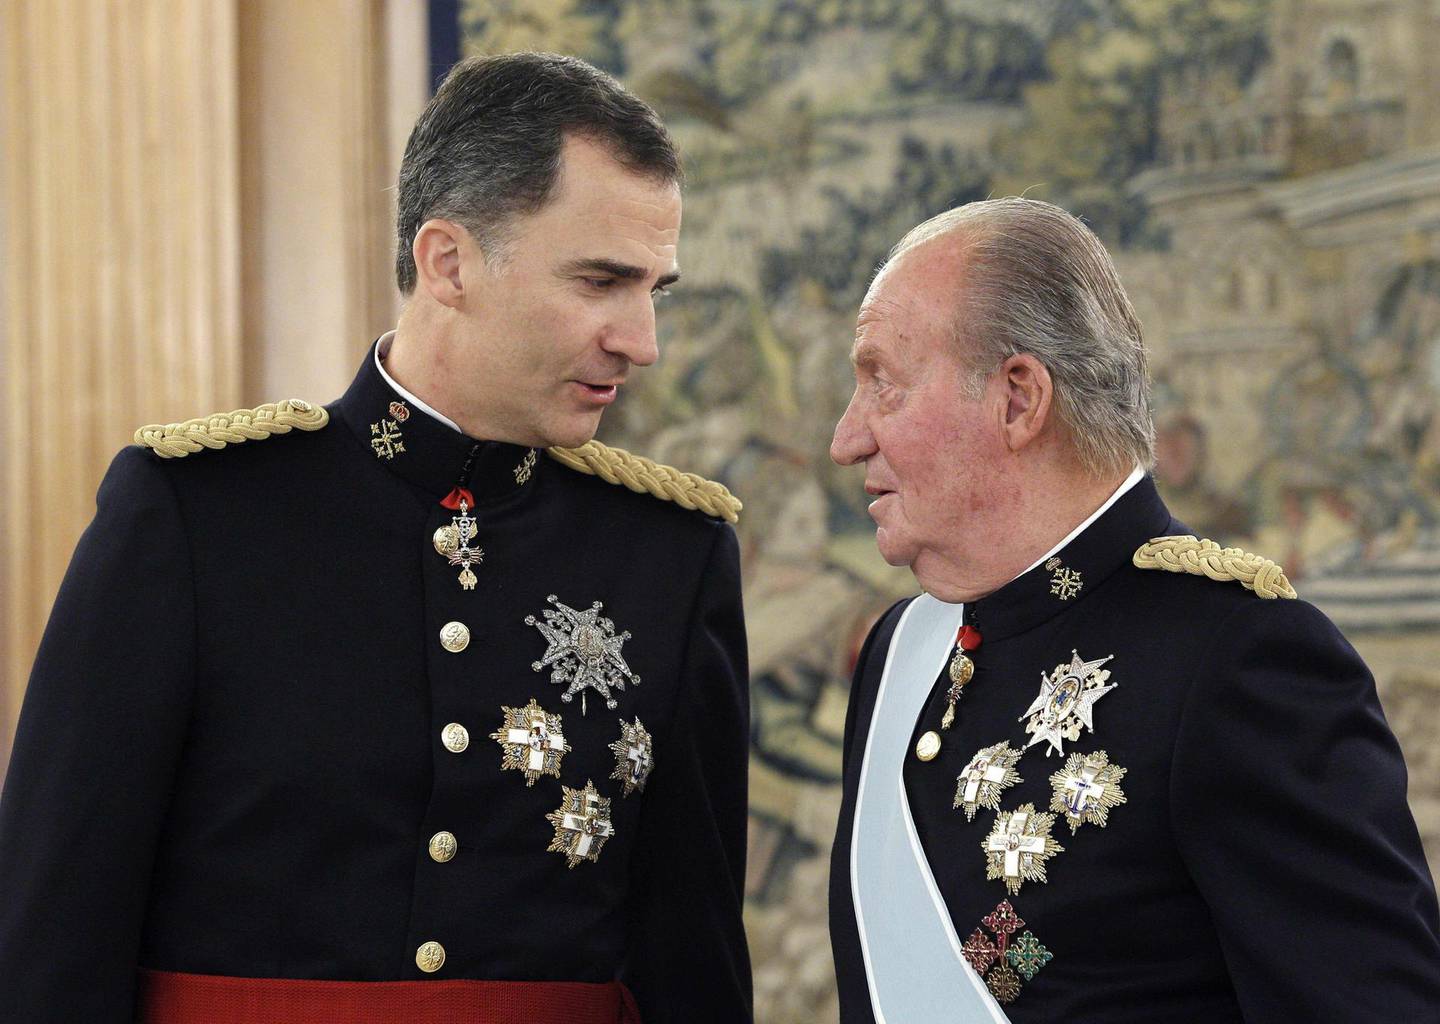 (FILES) In this file photo taken on June 19, 2014 Spain's King Felipe (L) and his father Spain's former King Juan Carlos stand during a handing over ceremony for the sash of the Capitain General in the Chamber of Audiences at the Zarzuela Palace .  Spain's former king Juan Carlos, who is under investigation for corruption, has announced he plans to go into exile, the royal palace said on August 2, 2020.  / AFP / POOL / ZIPI
